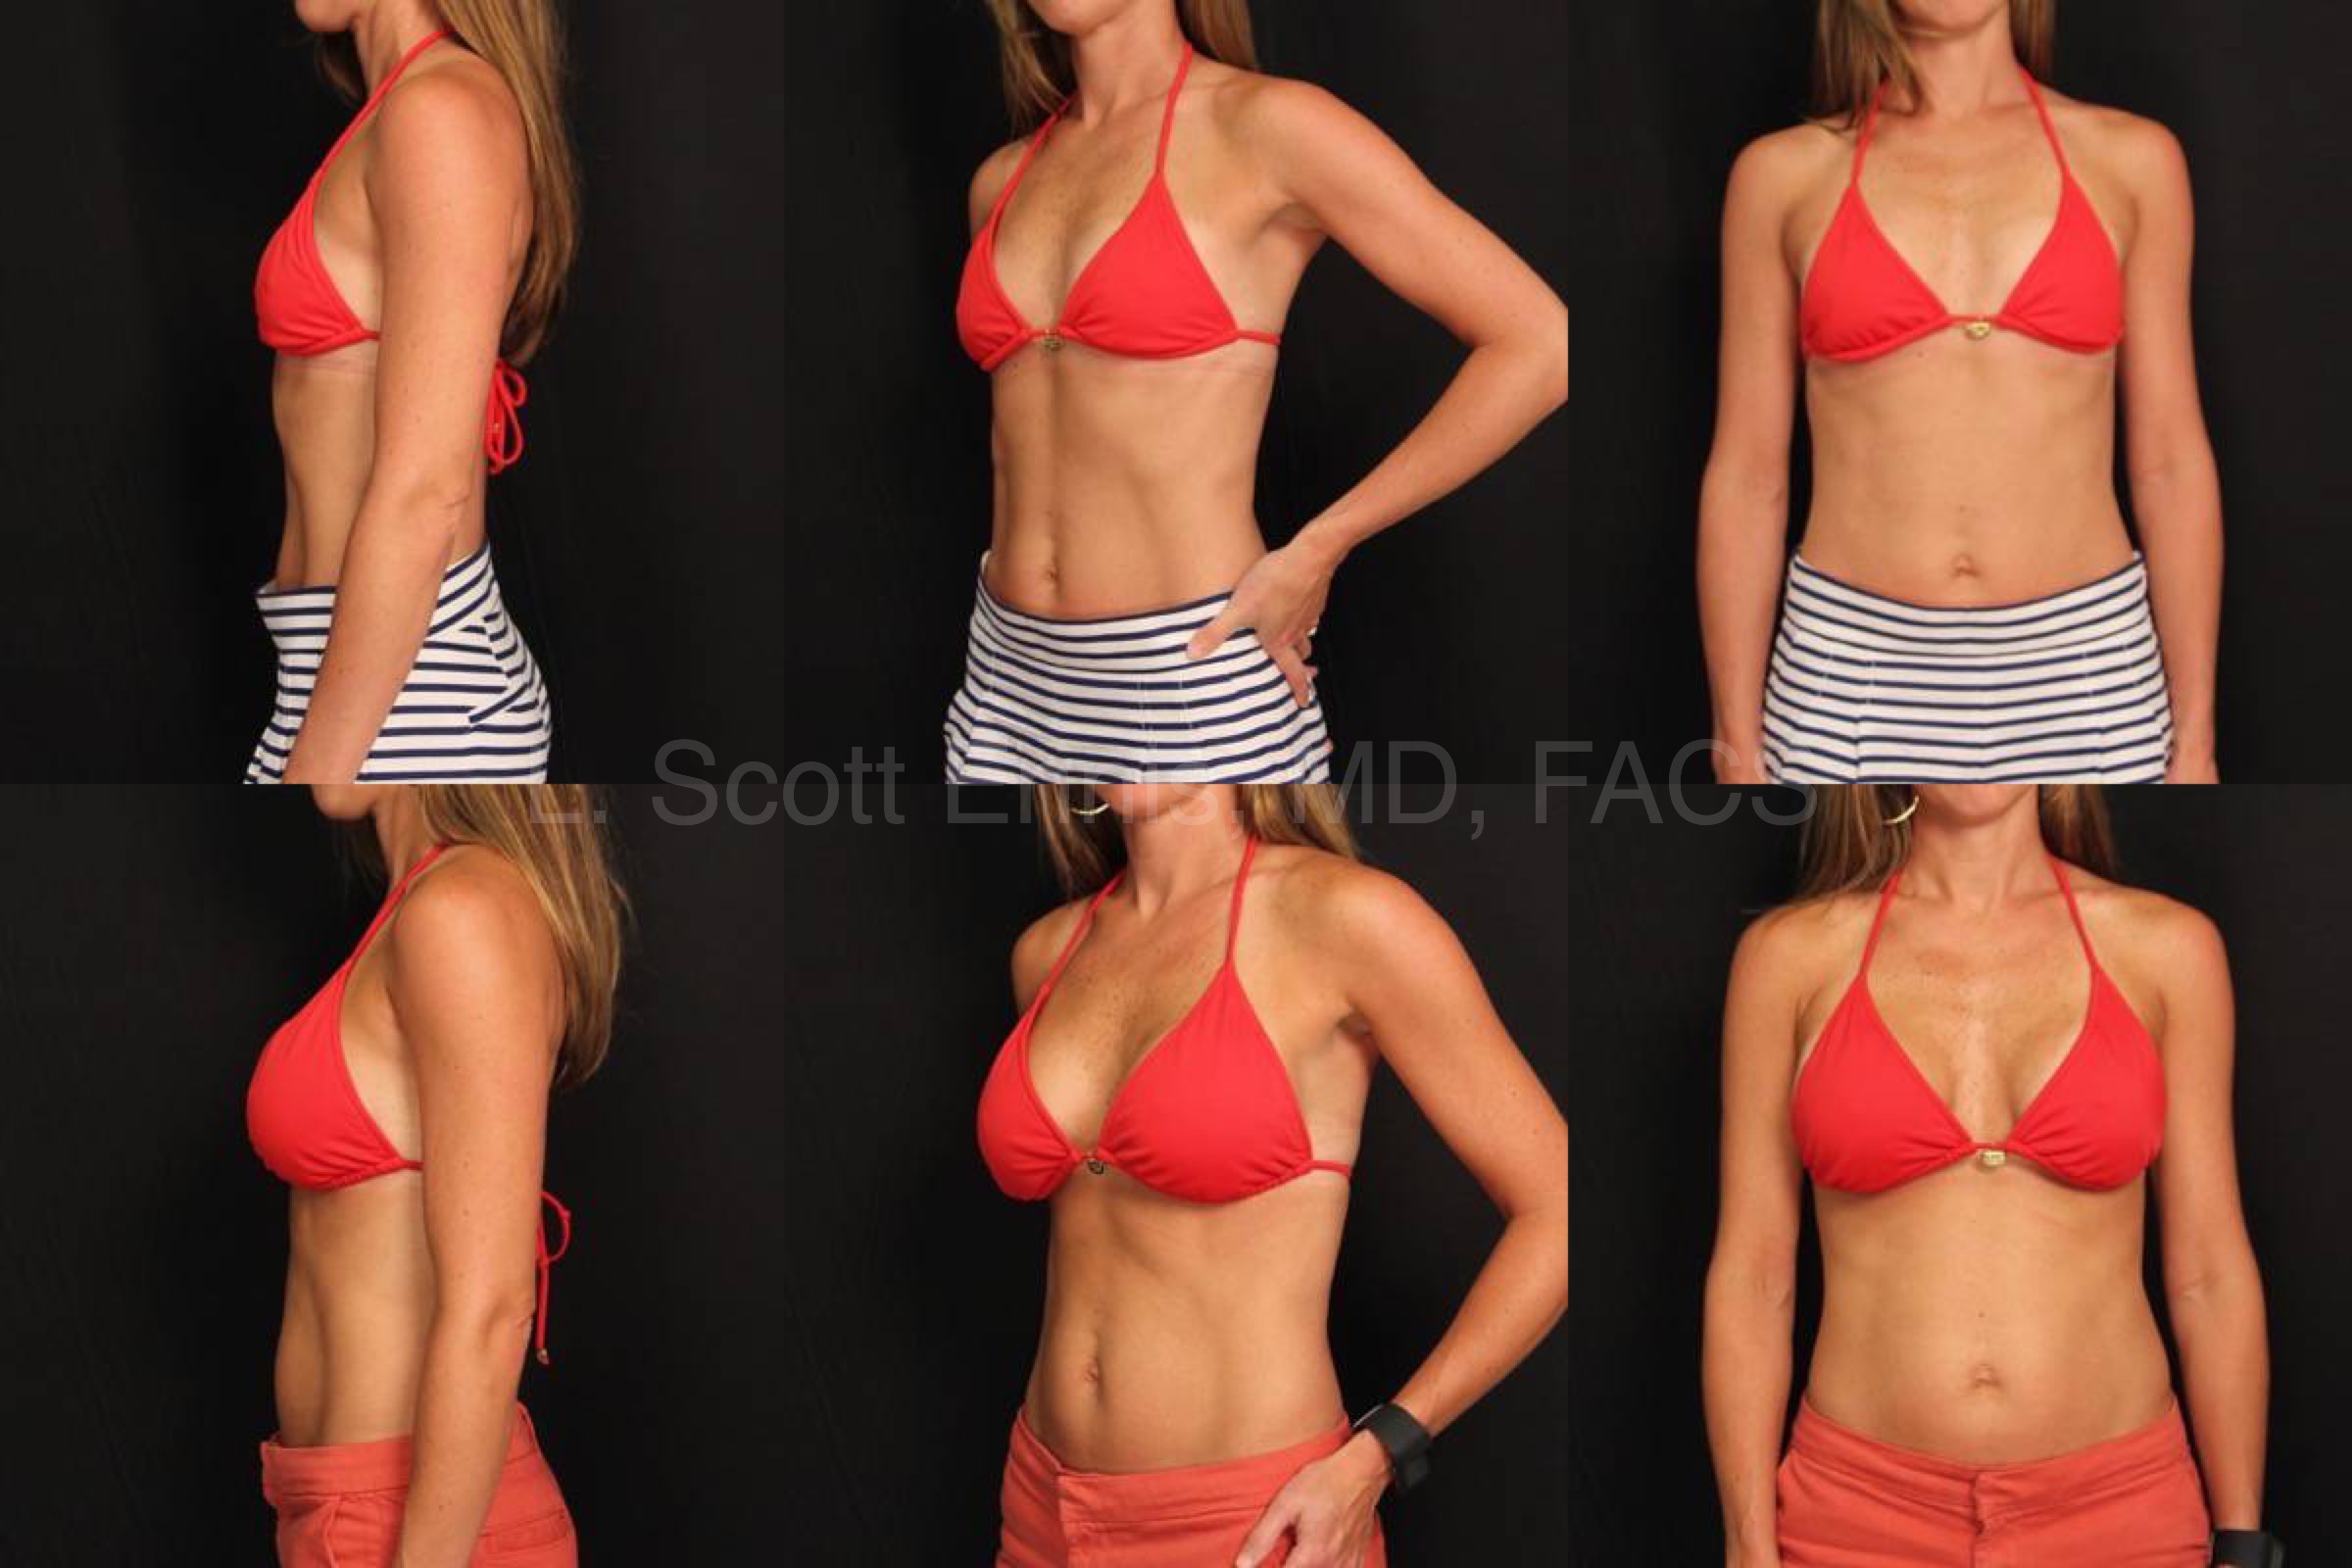 Natural Breast Lift Without Incisions or Implants - Miami Breast